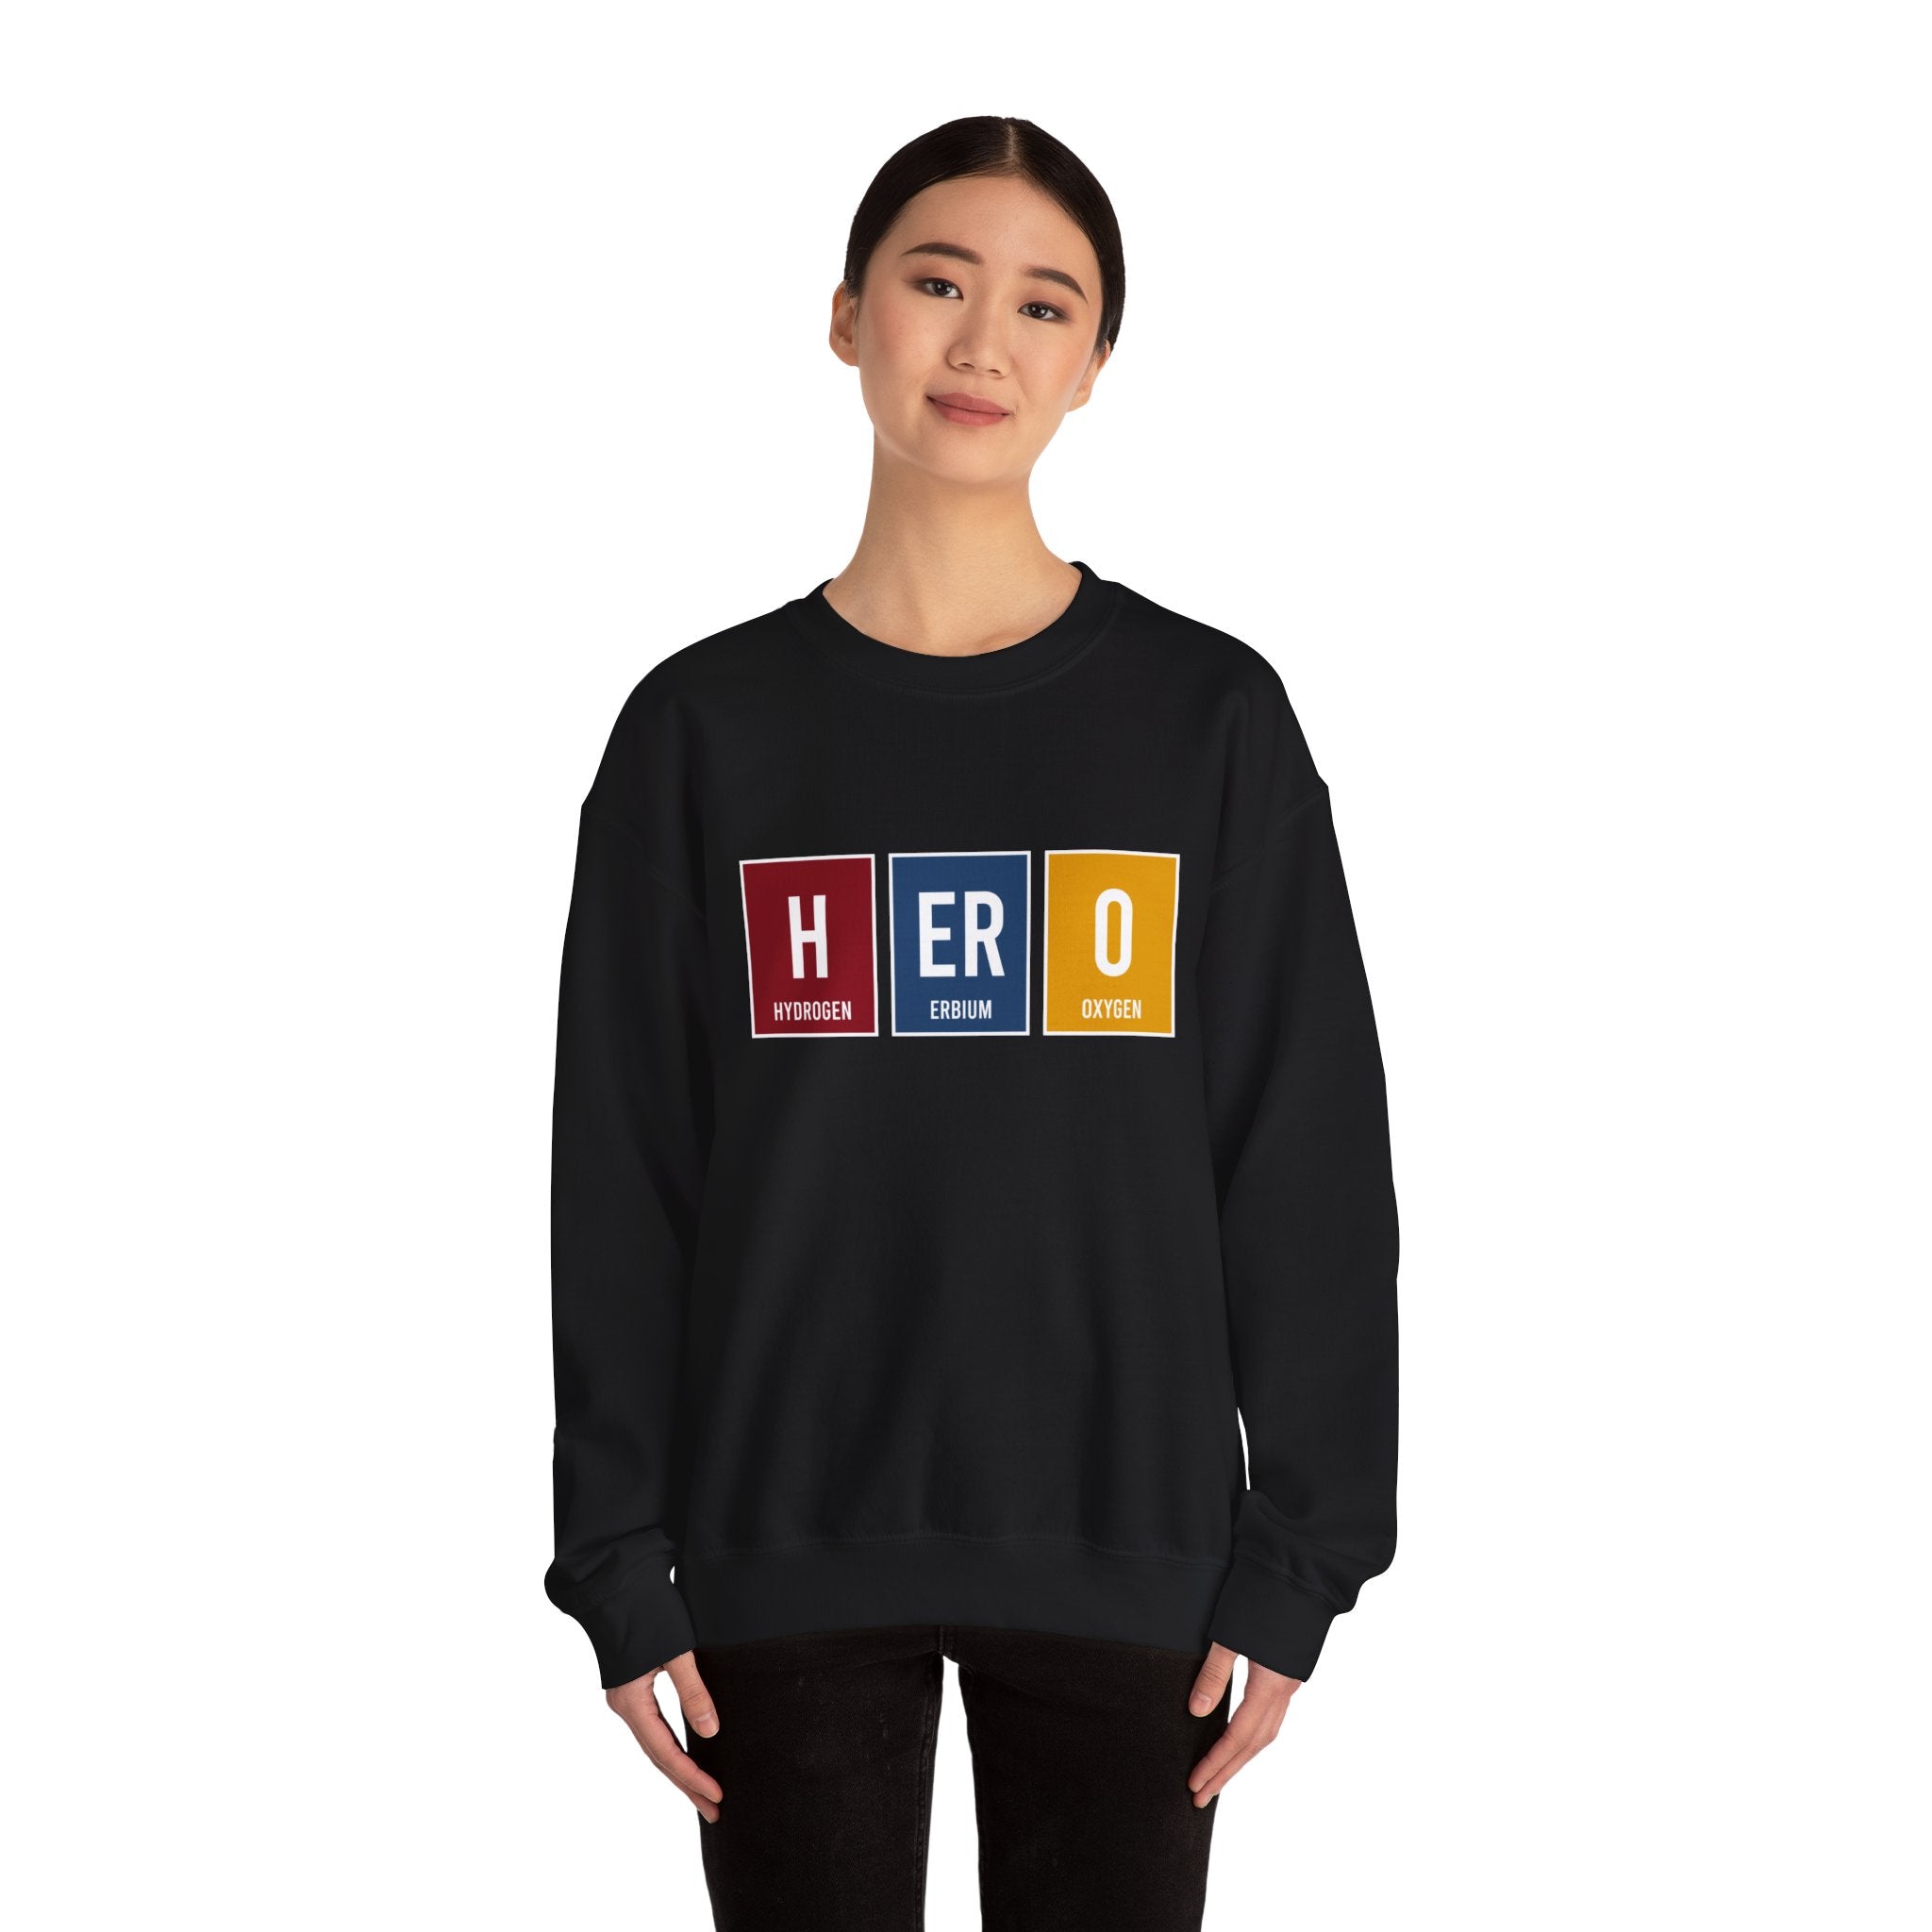 Person wearing a HERO - Sweatshirt with a periodic table style "HERO" on the front, showcasing comfort and style perfect for making winters warmer.